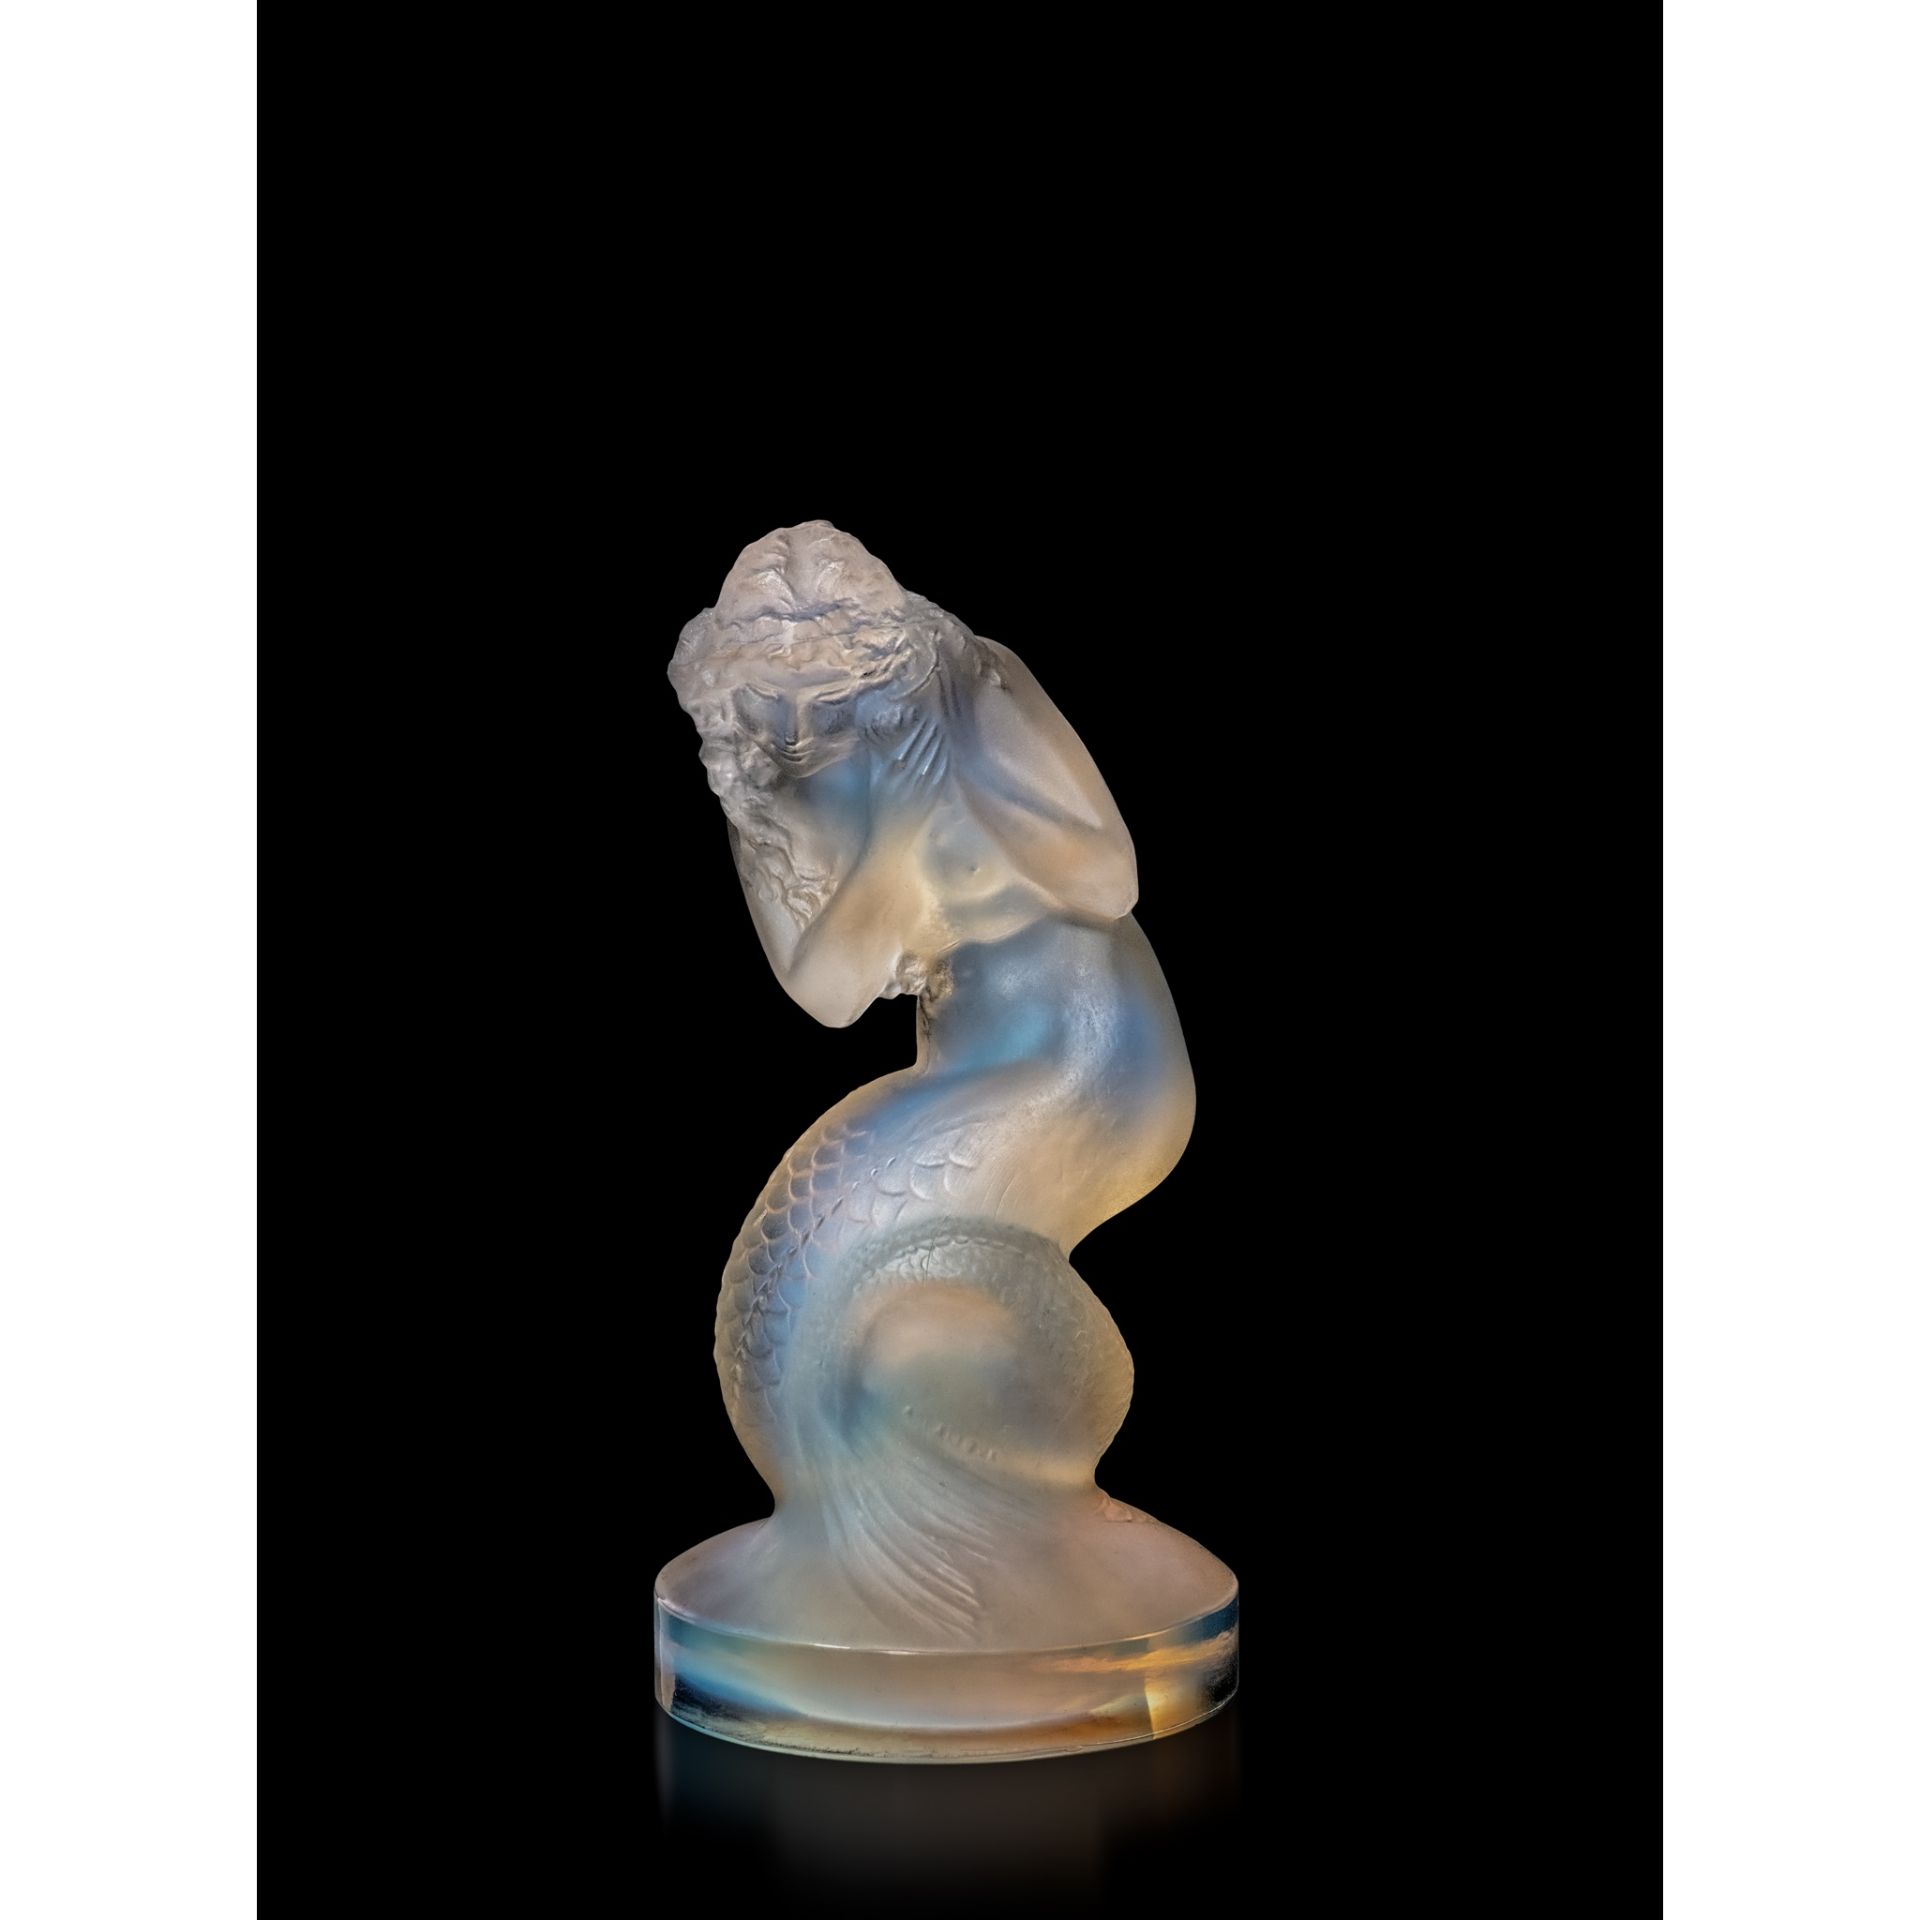 René Lalique (French 1860-1945) NAIADE PAPERWEIGHT, NO. 832 - Image 2 of 2